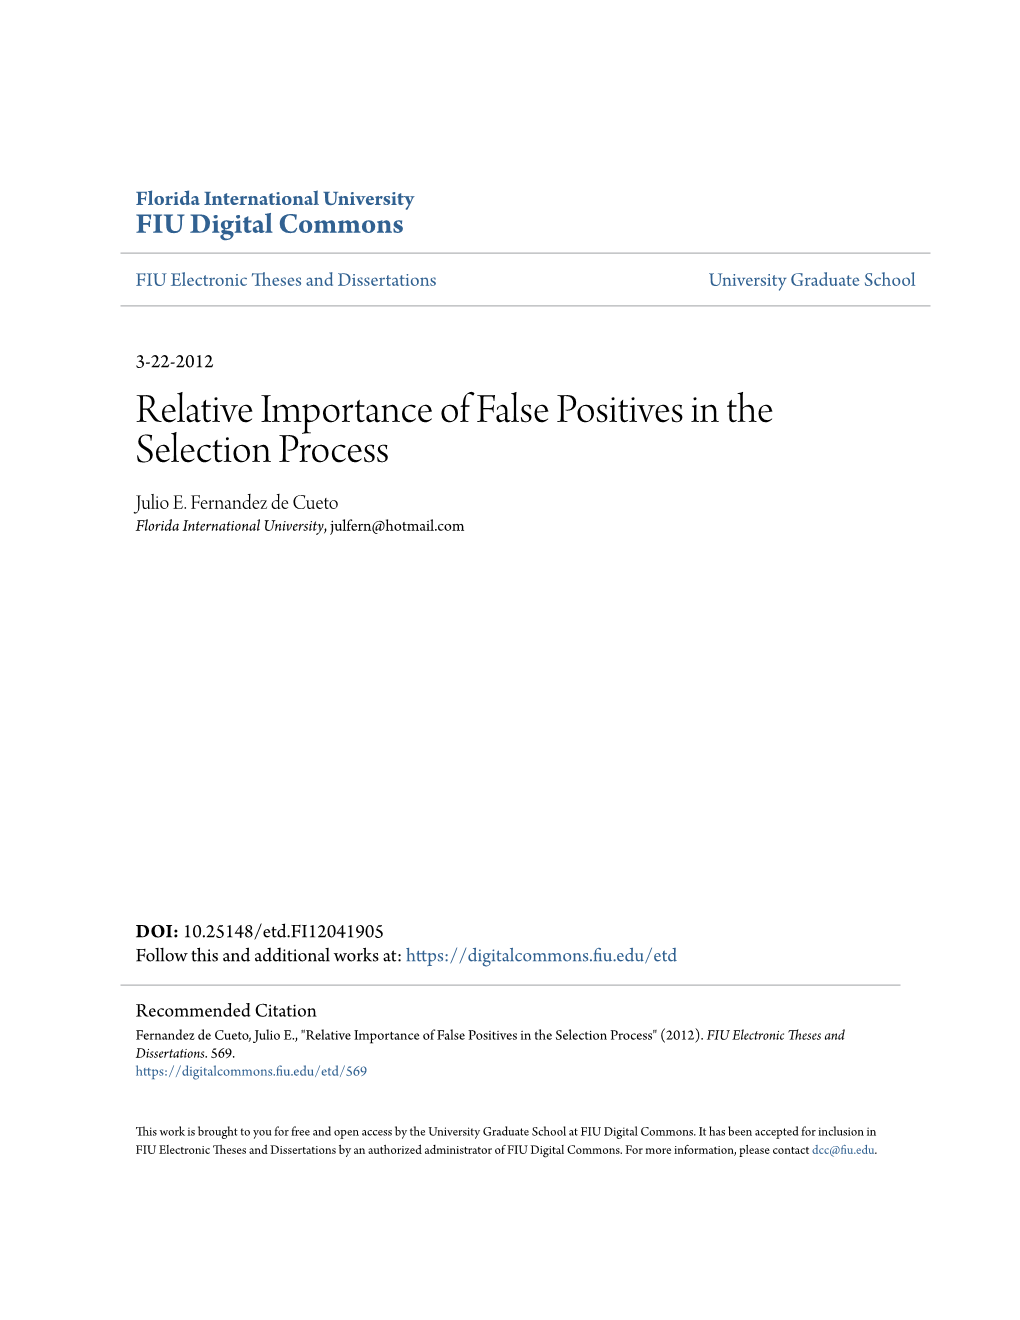 Relative Importance of False Positives in the Selection Process Julio E